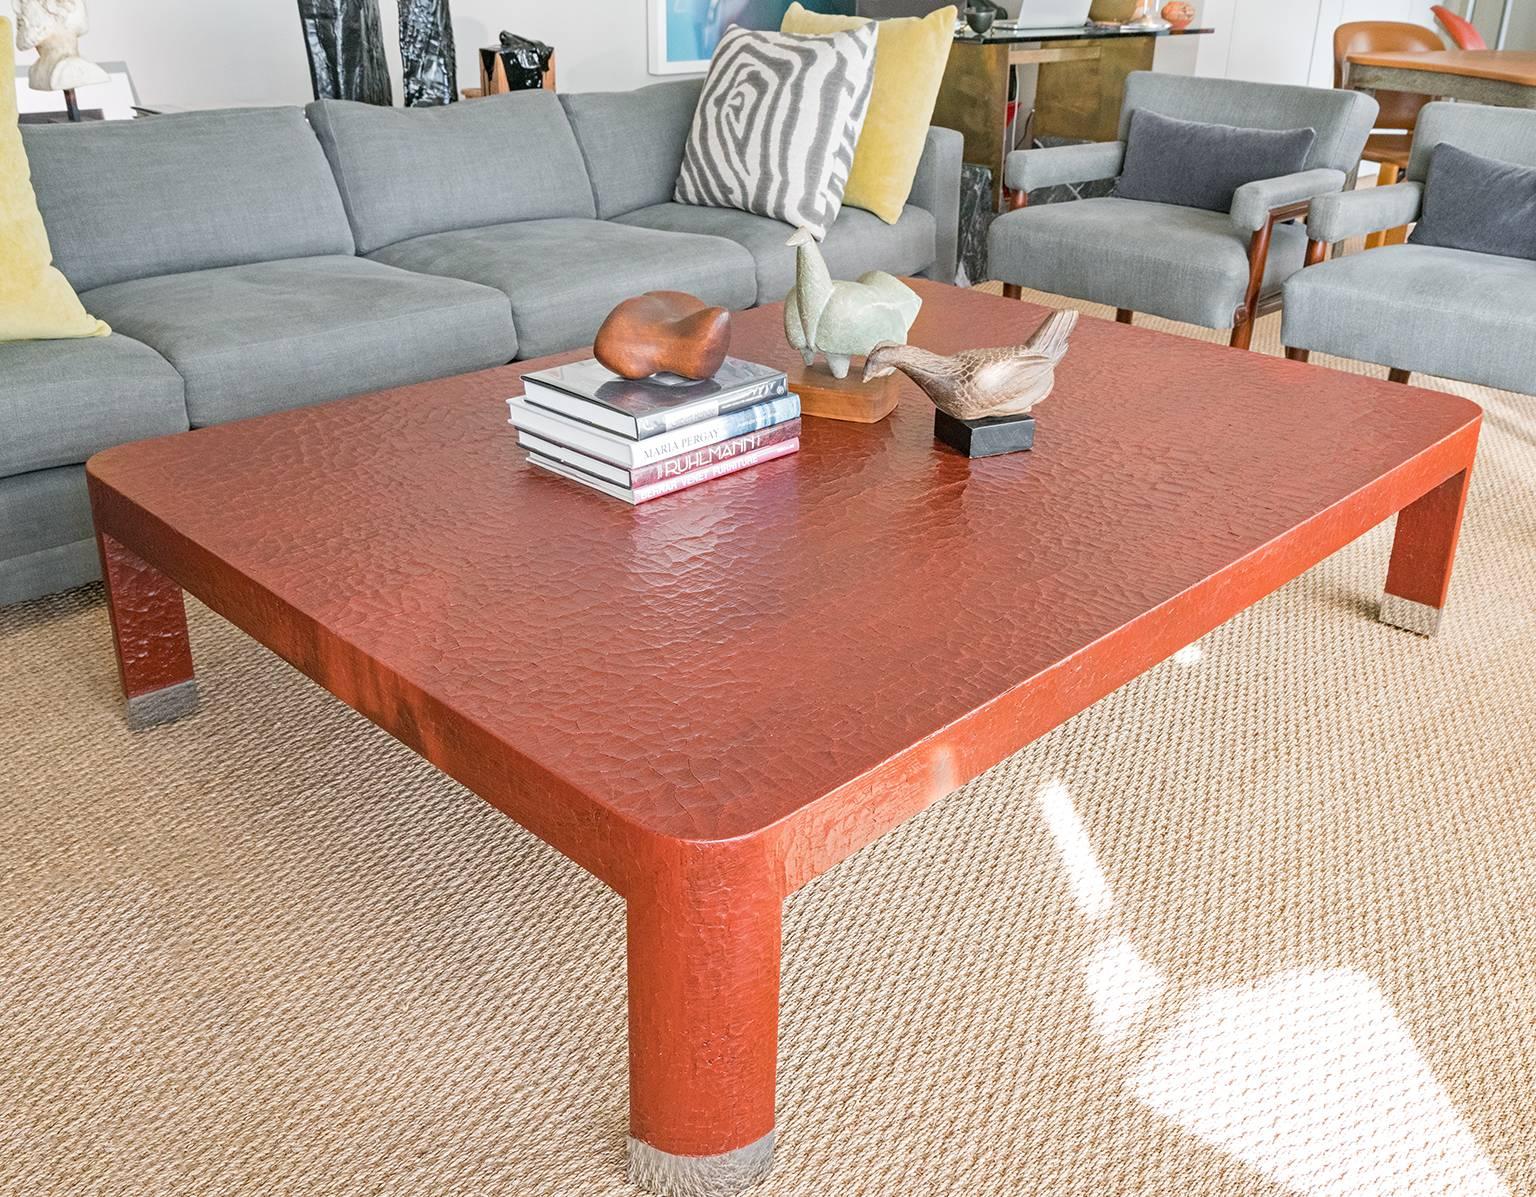 A beautiful crackled linen finish oversized coffee table designed by Karl Springer.
 